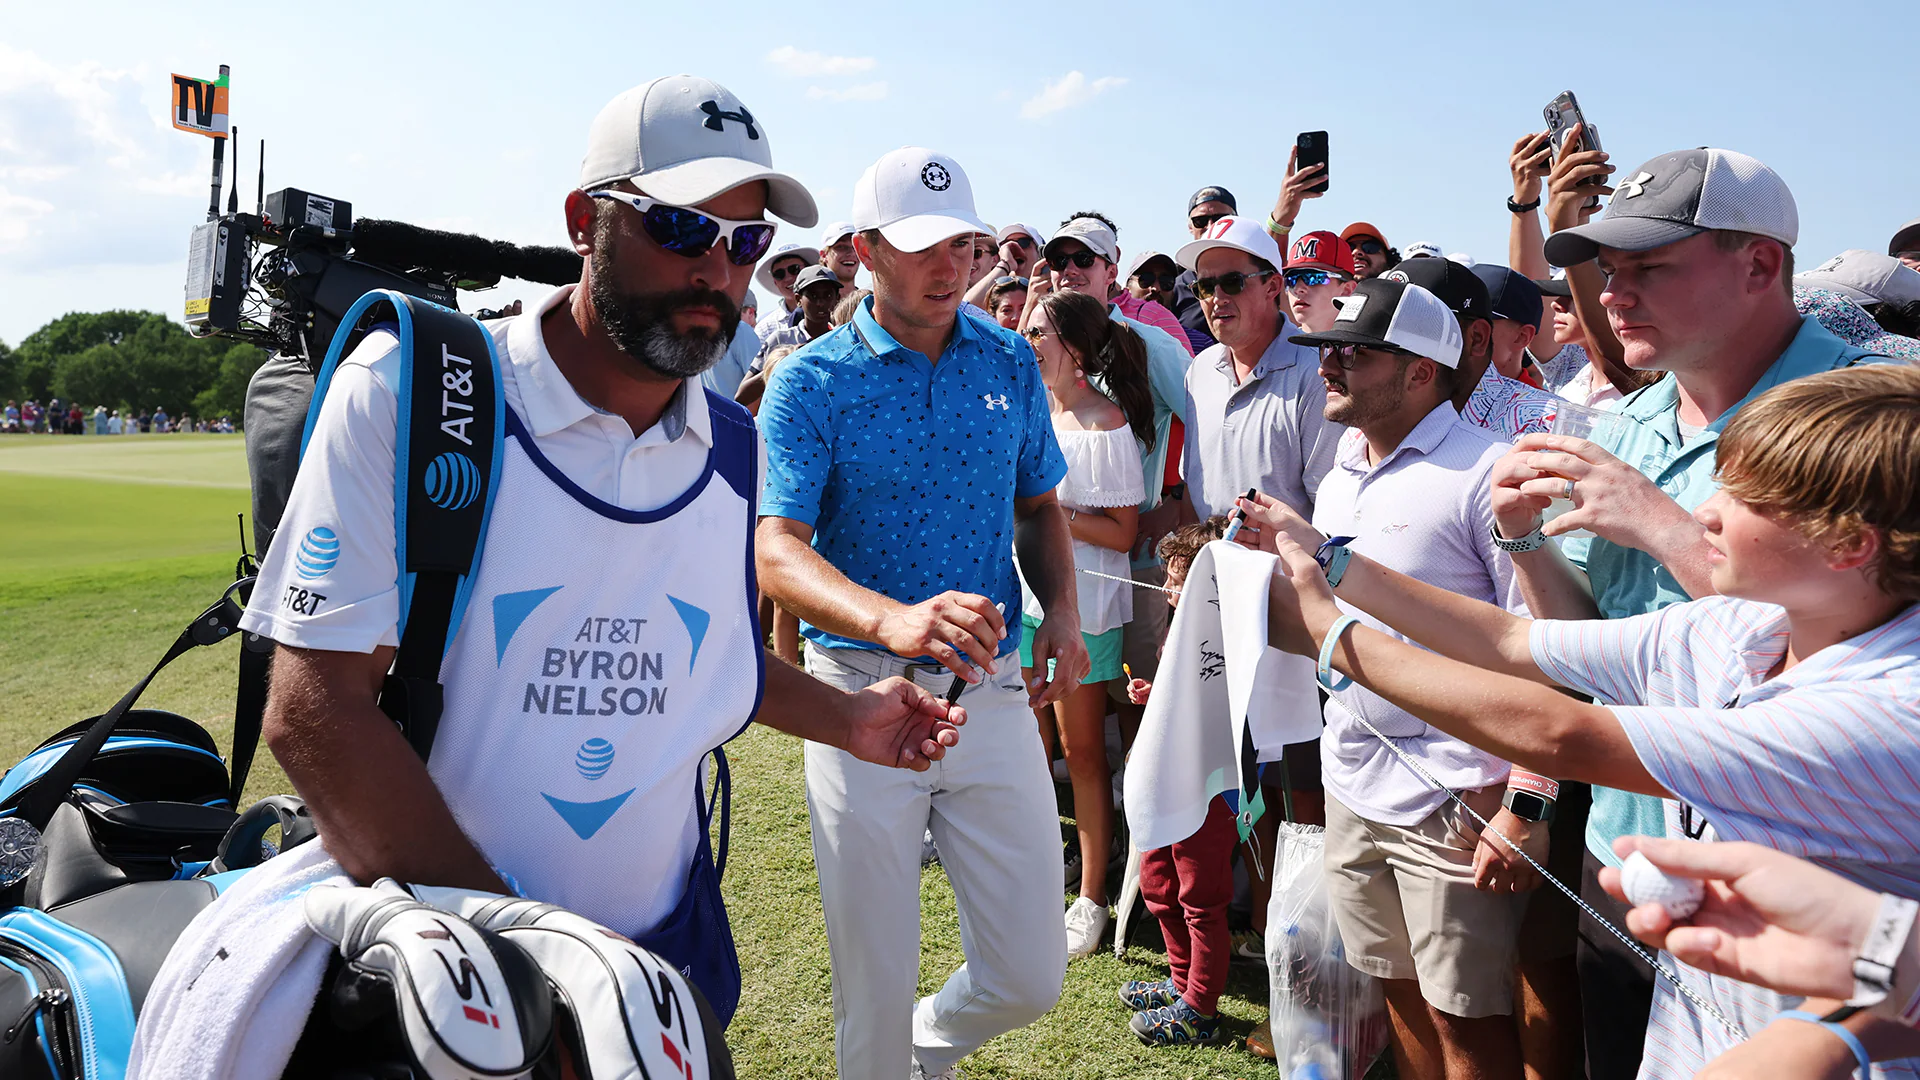 The Nelson has eluded Jordan Spieth, but that could change Sunday